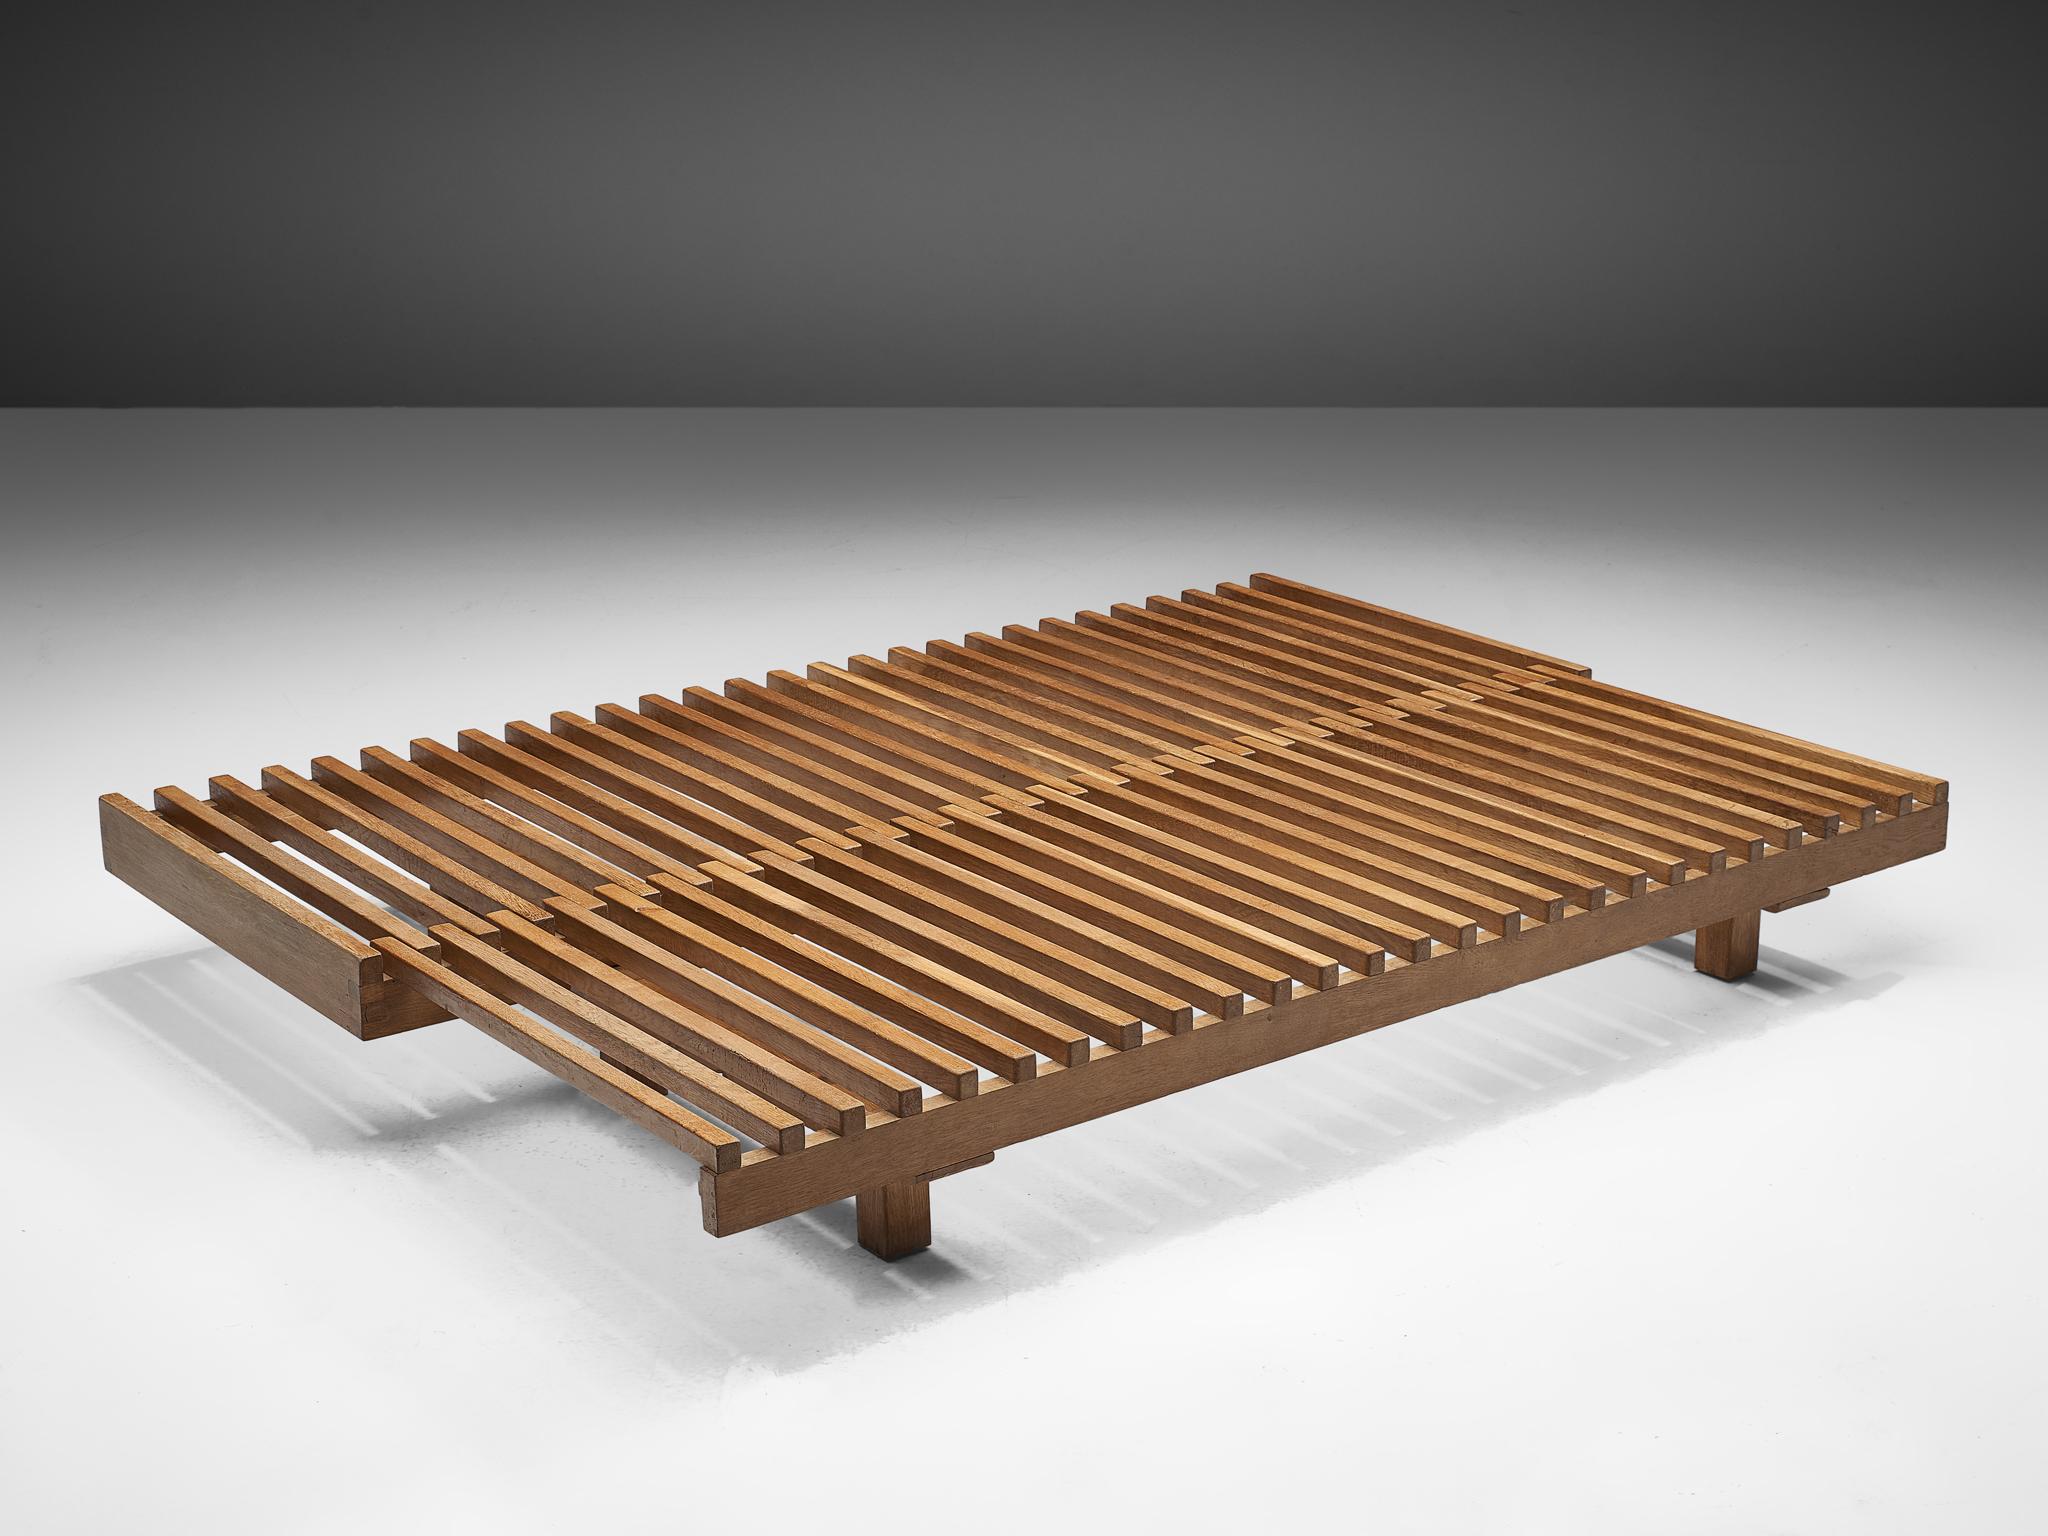 Pierre Chapo, L07 extendable day bed, oak, France, 1963.

This exquisite slidable wood structure, can create space for one or two people to lay on it. This piece impeccable in its technique, as it can be modified to the desired function without any